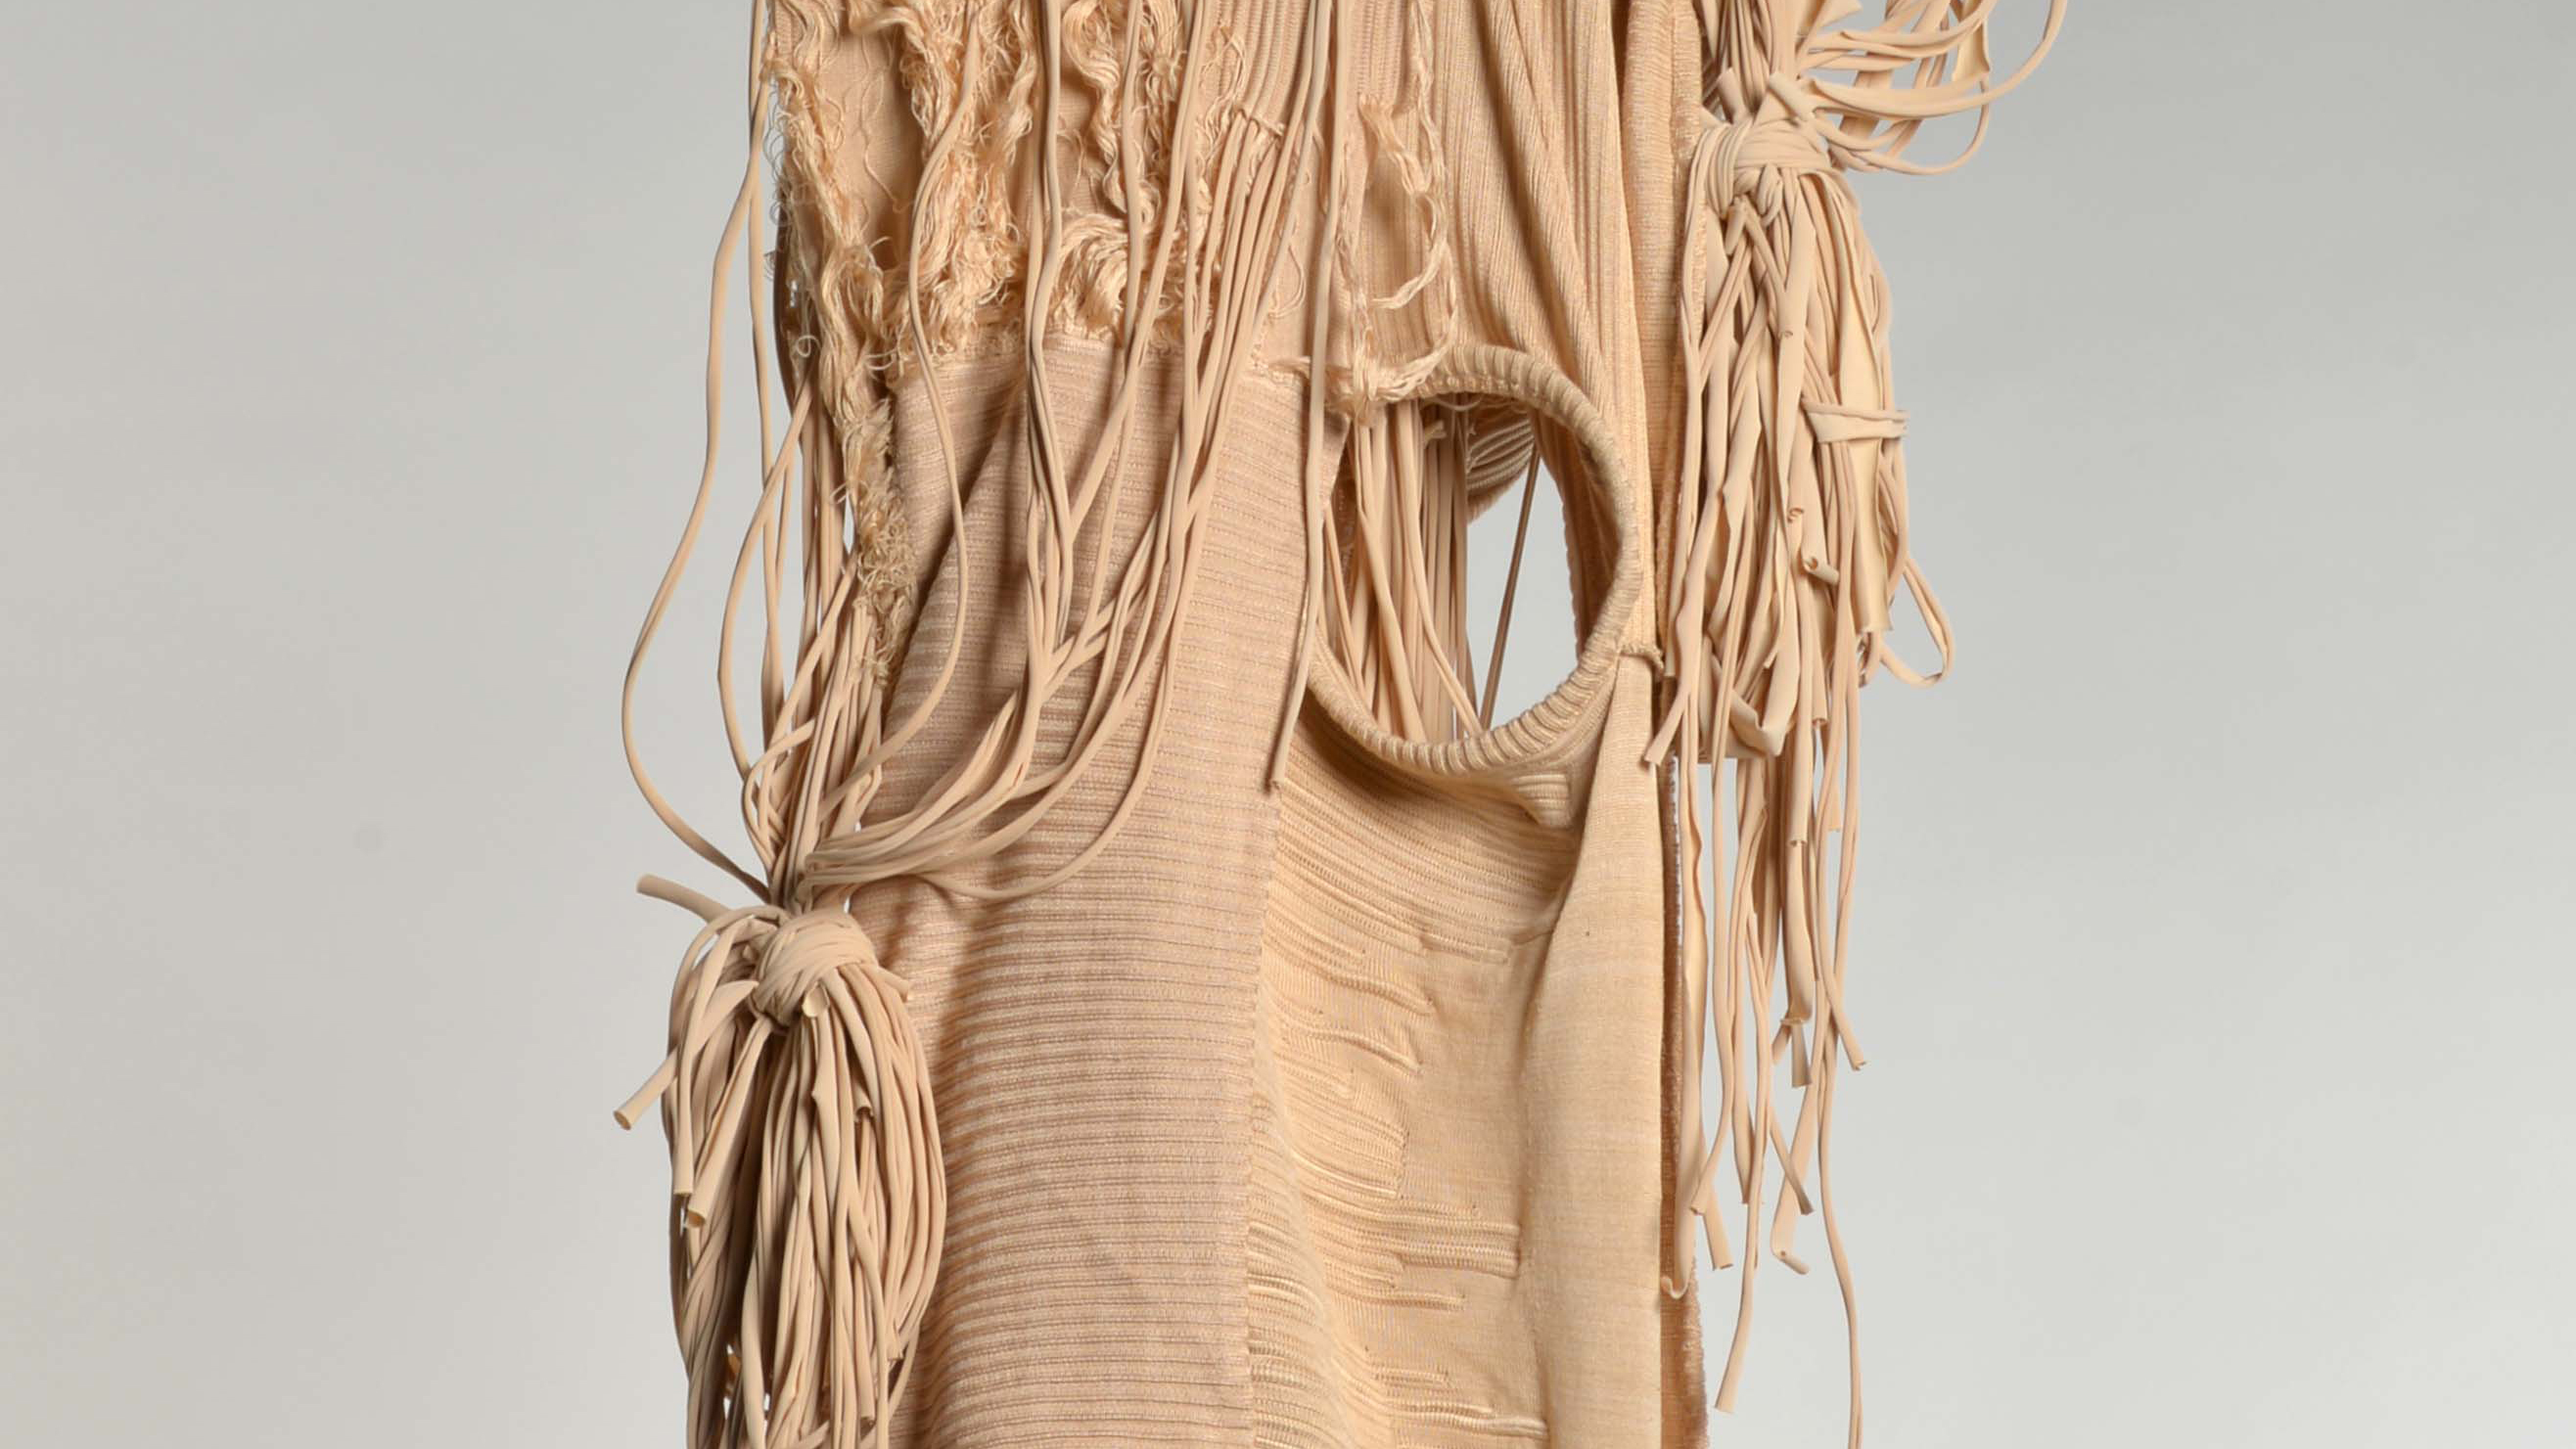 Contemporary hanging textile sculpture in a muted warm earthy colour consisting of a central panel with knotted fabric strands. By Mila Harris-Mussi.